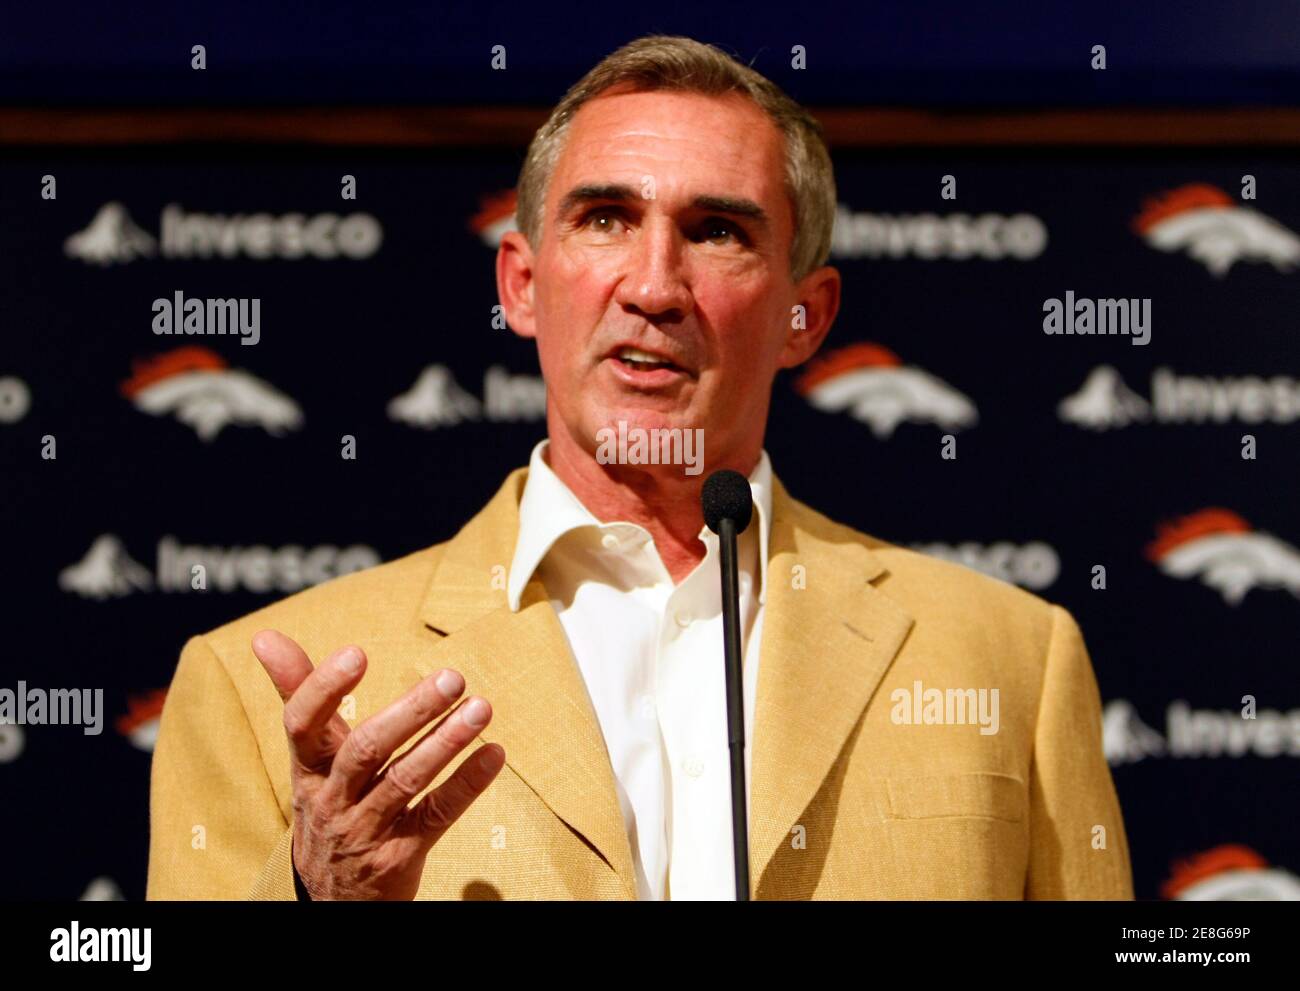 Former Denver Broncos head coach Mike Shanahan speaks at a news conference at Broncos headquarters in Denver December 31, 2008. Shanahan was fired as the head coach December 30. REUTERS/Rick Wilking (UNITED STATES) Stock Photo